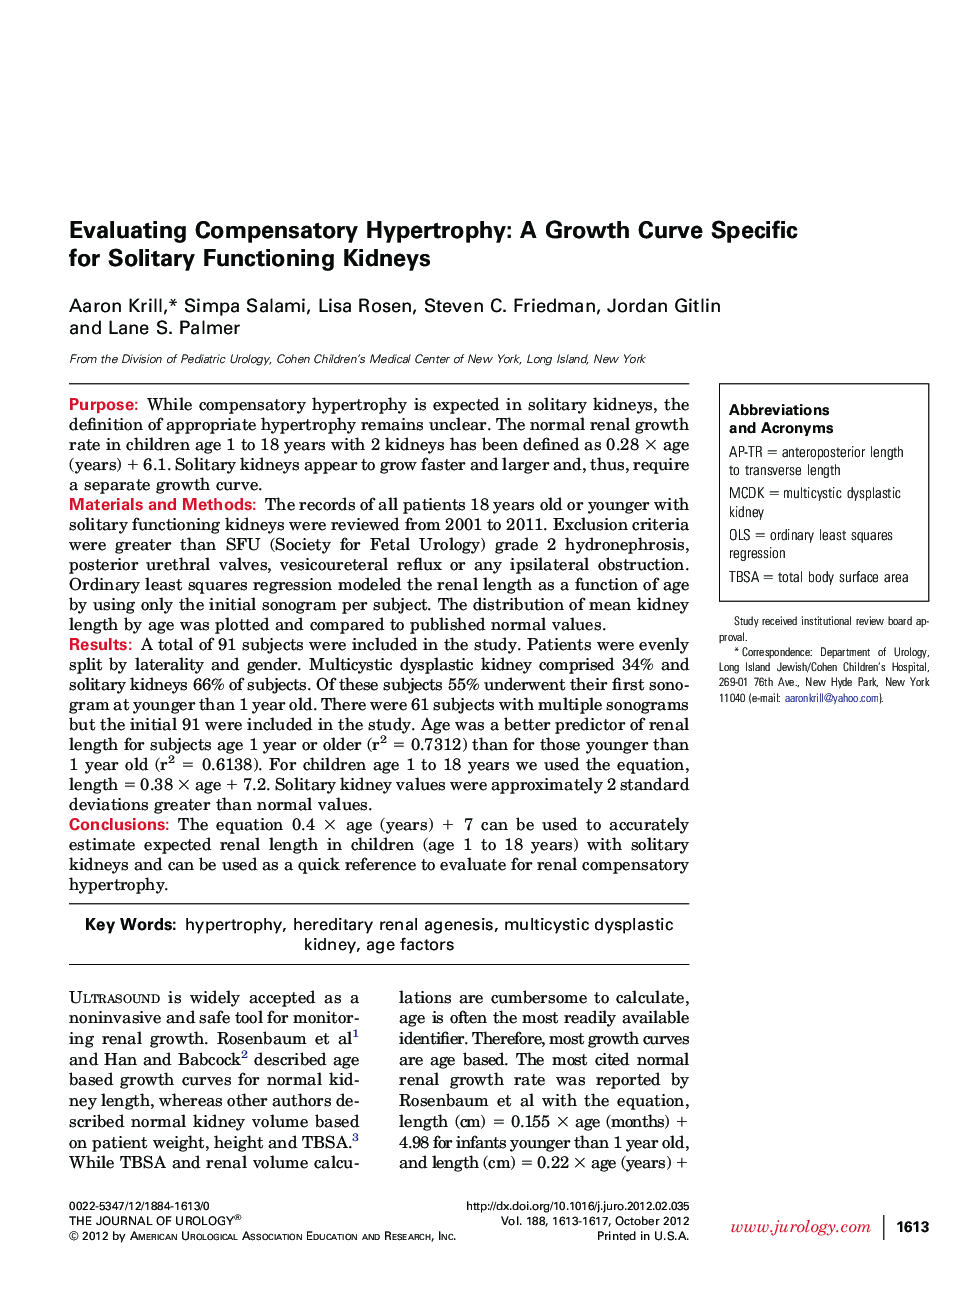 Evaluating Compensatory Hypertrophy: A Growth Curve Specific for Solitary Functioning Kidneys